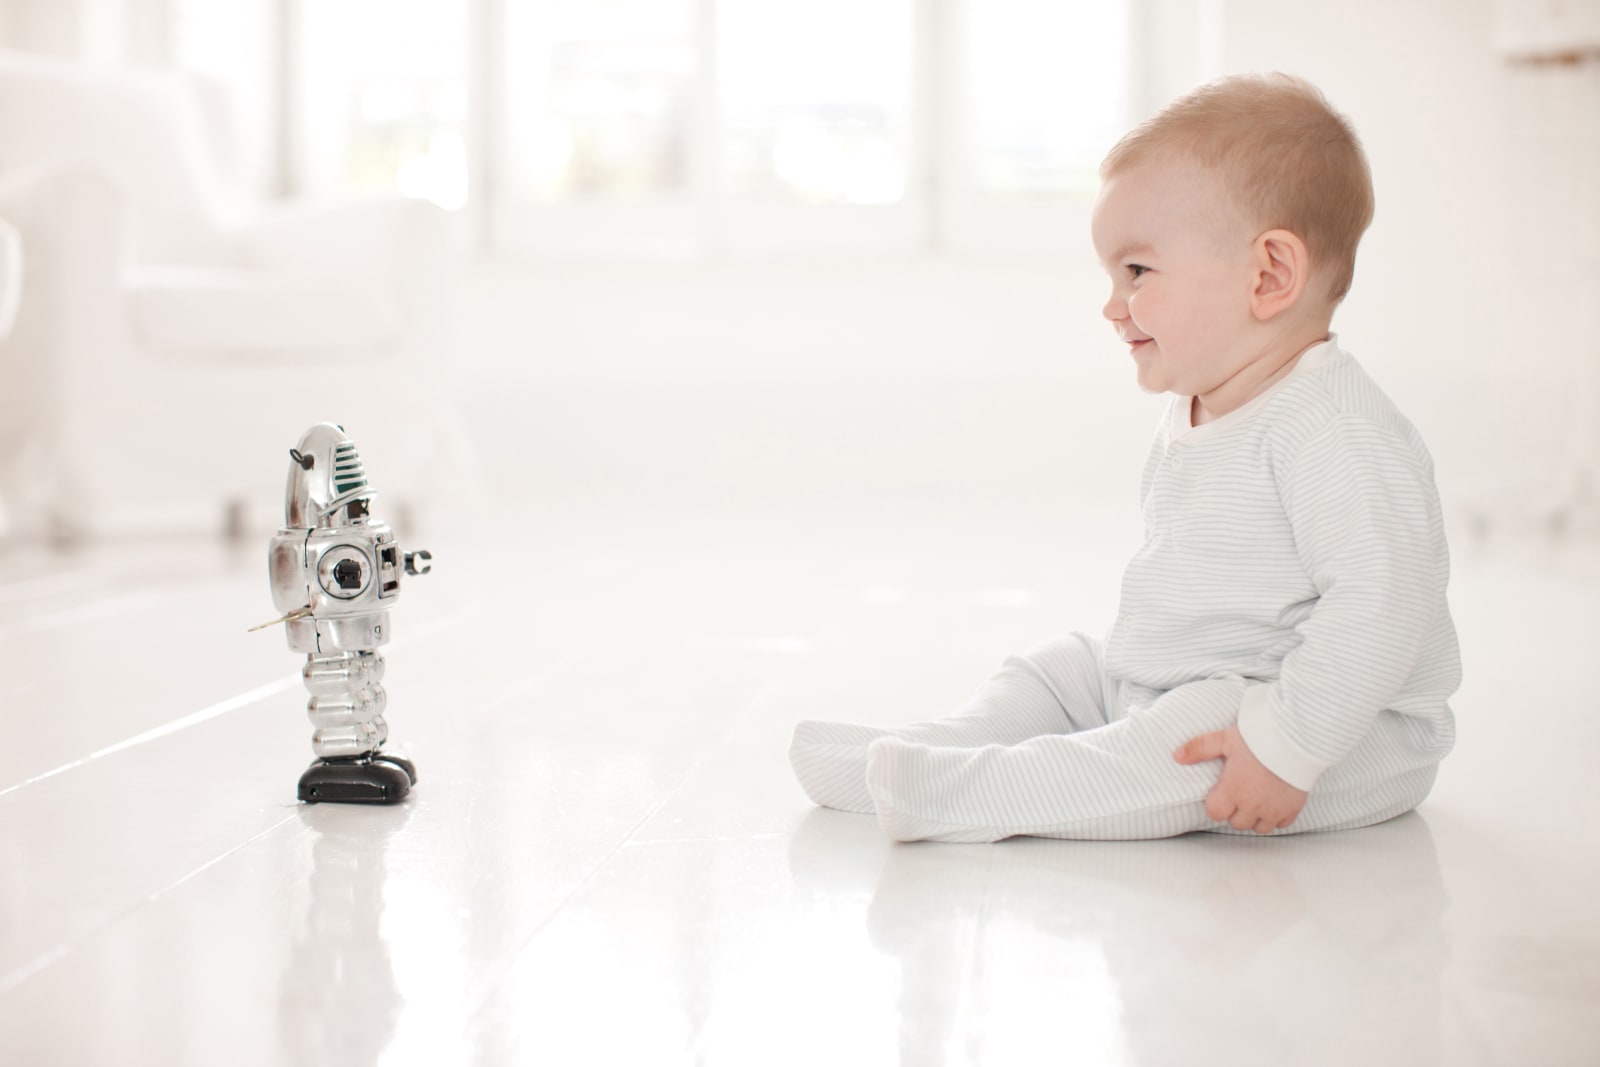 Baby on floor looking at toy robot